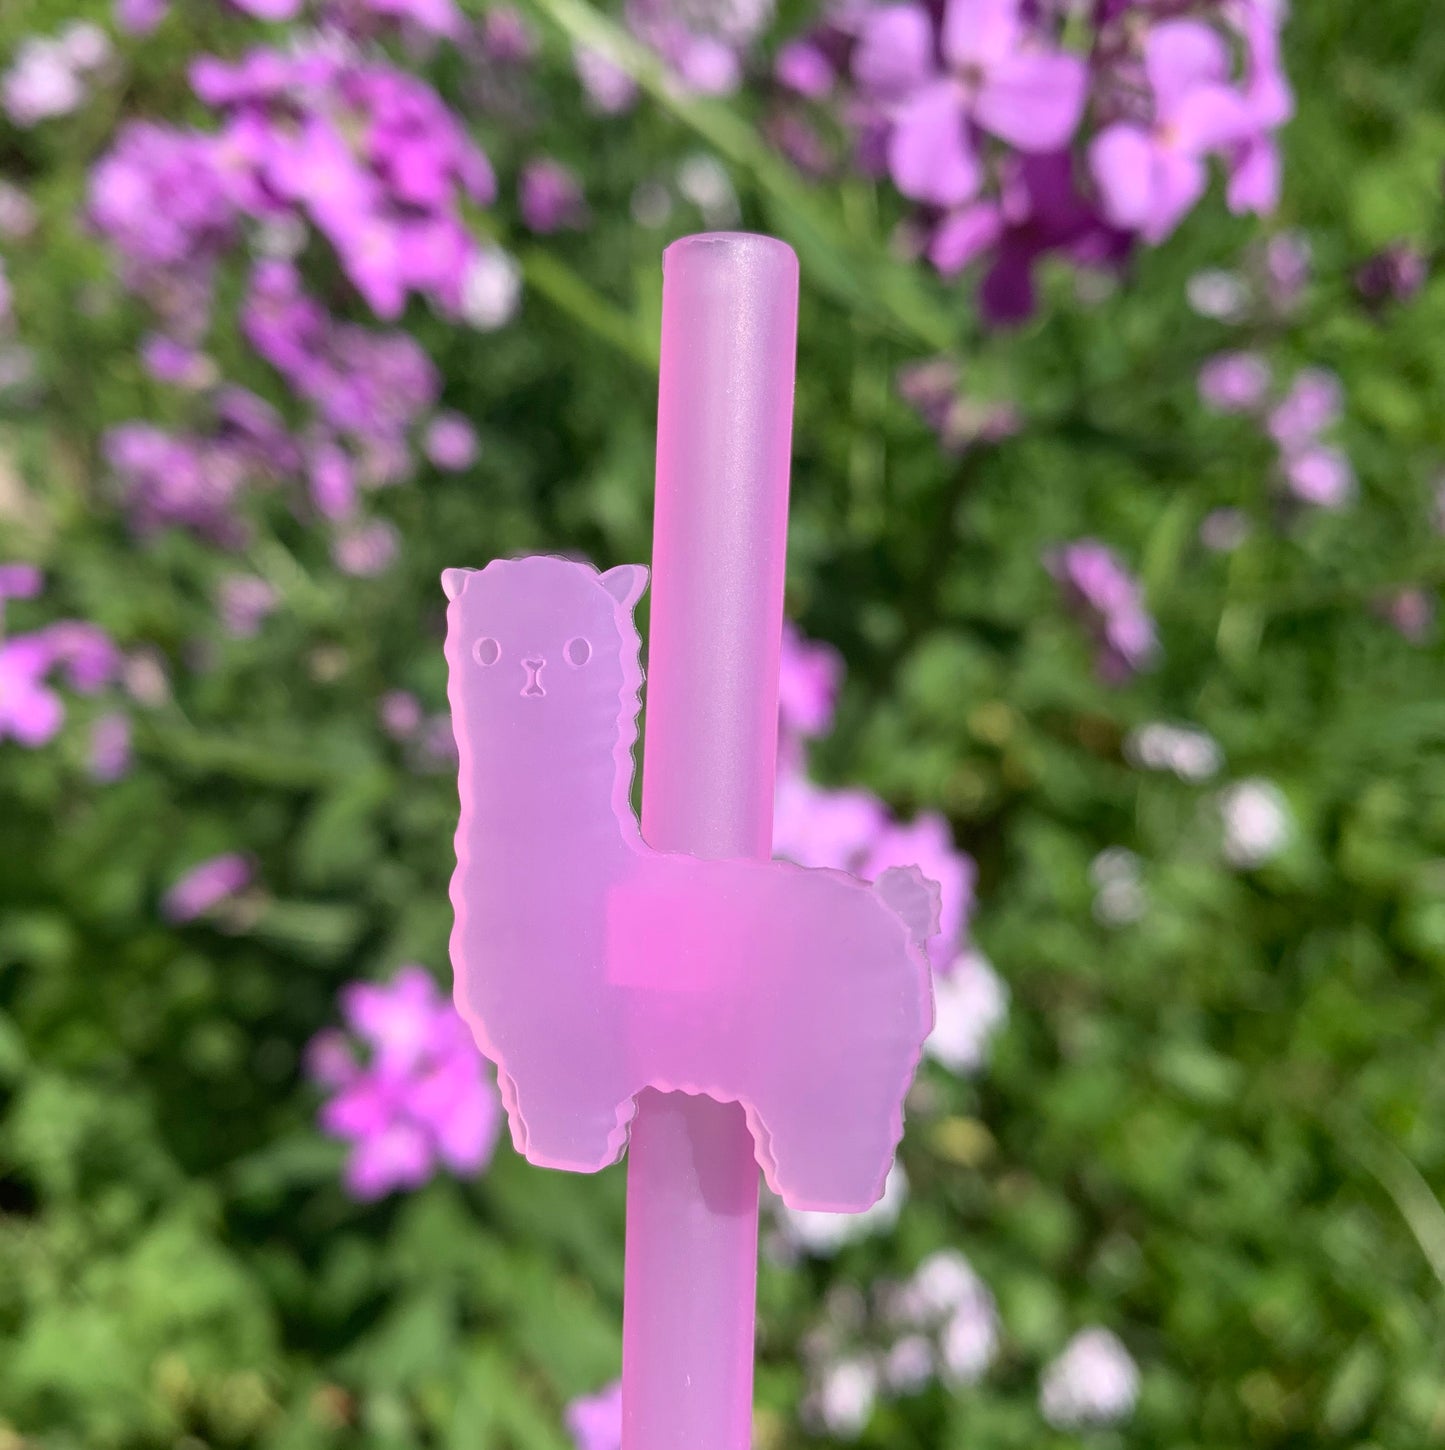 Animal Friend Straws - Jelly and Llama 2 Pack